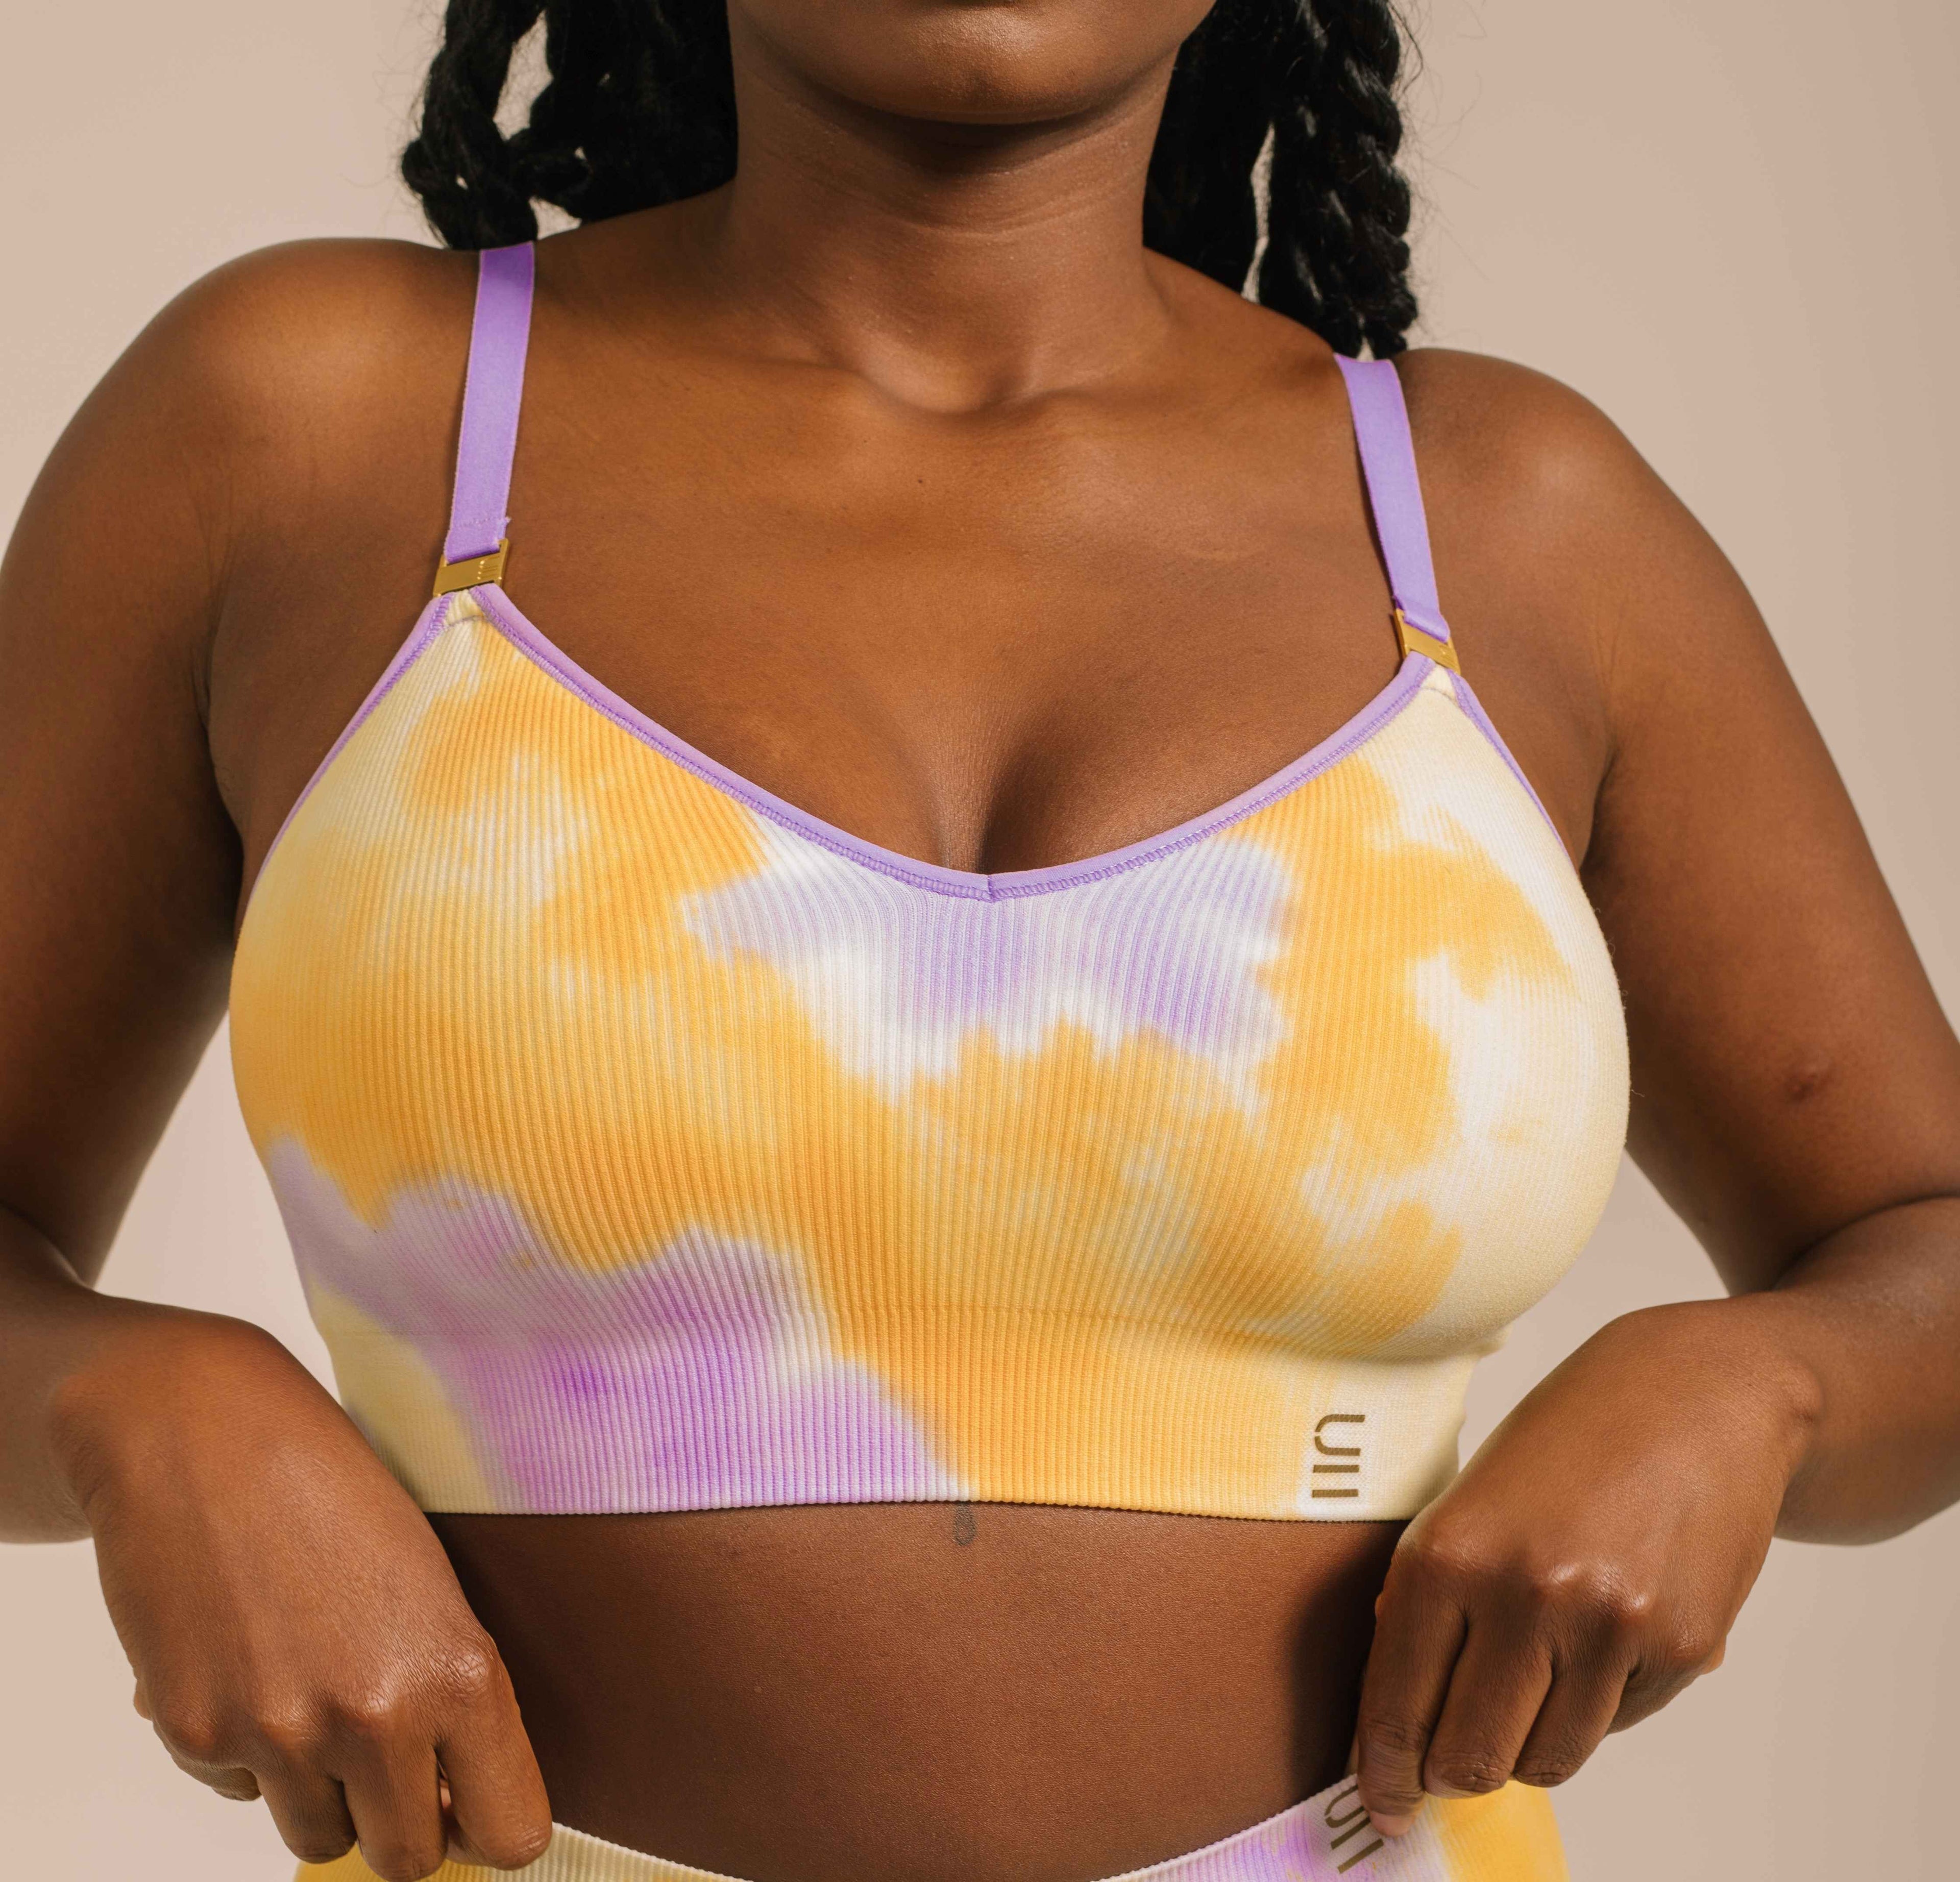 Sustainable sunrise yellow and purple tie dye wireless bra by Underwear For Humanity: ethical, sustainable. A -D cup sizes. Recycled materials, flexible, supportive. Knitted bra and band, adjustable straps. Models show case A-D bra